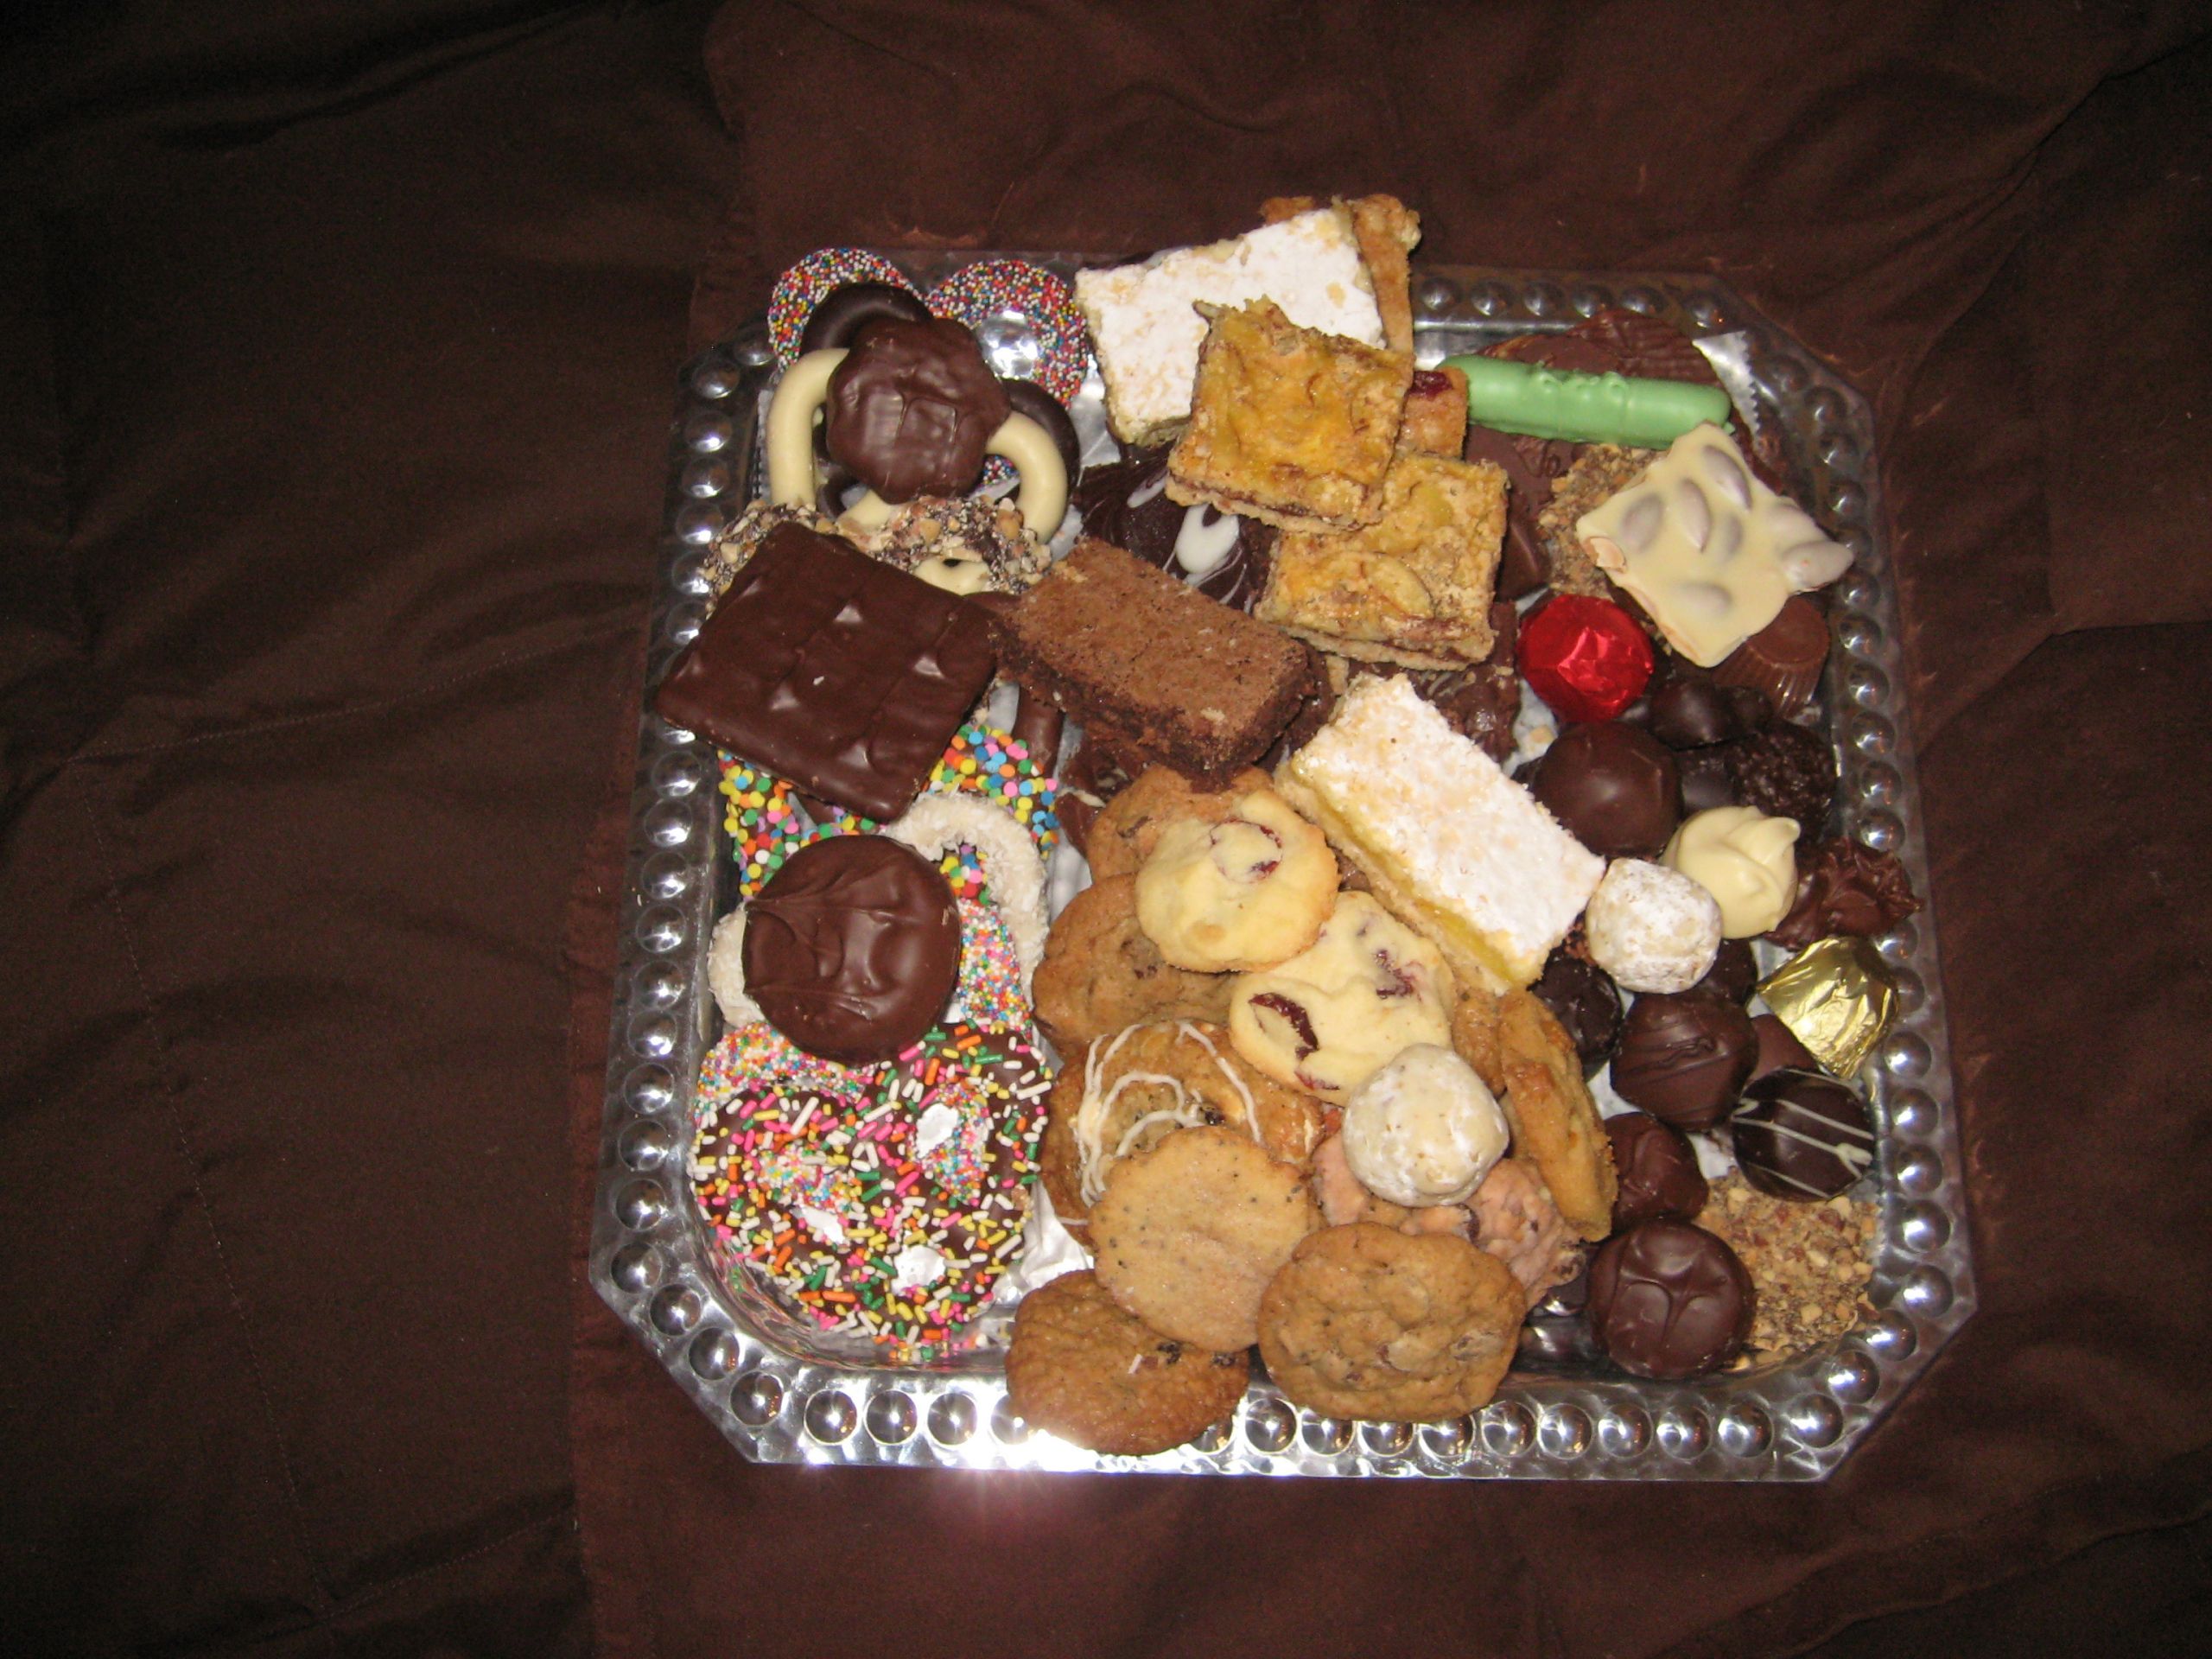 Baked Goods Gift Basket Ideas
 Hand Made Gift Baskets by Sheryl